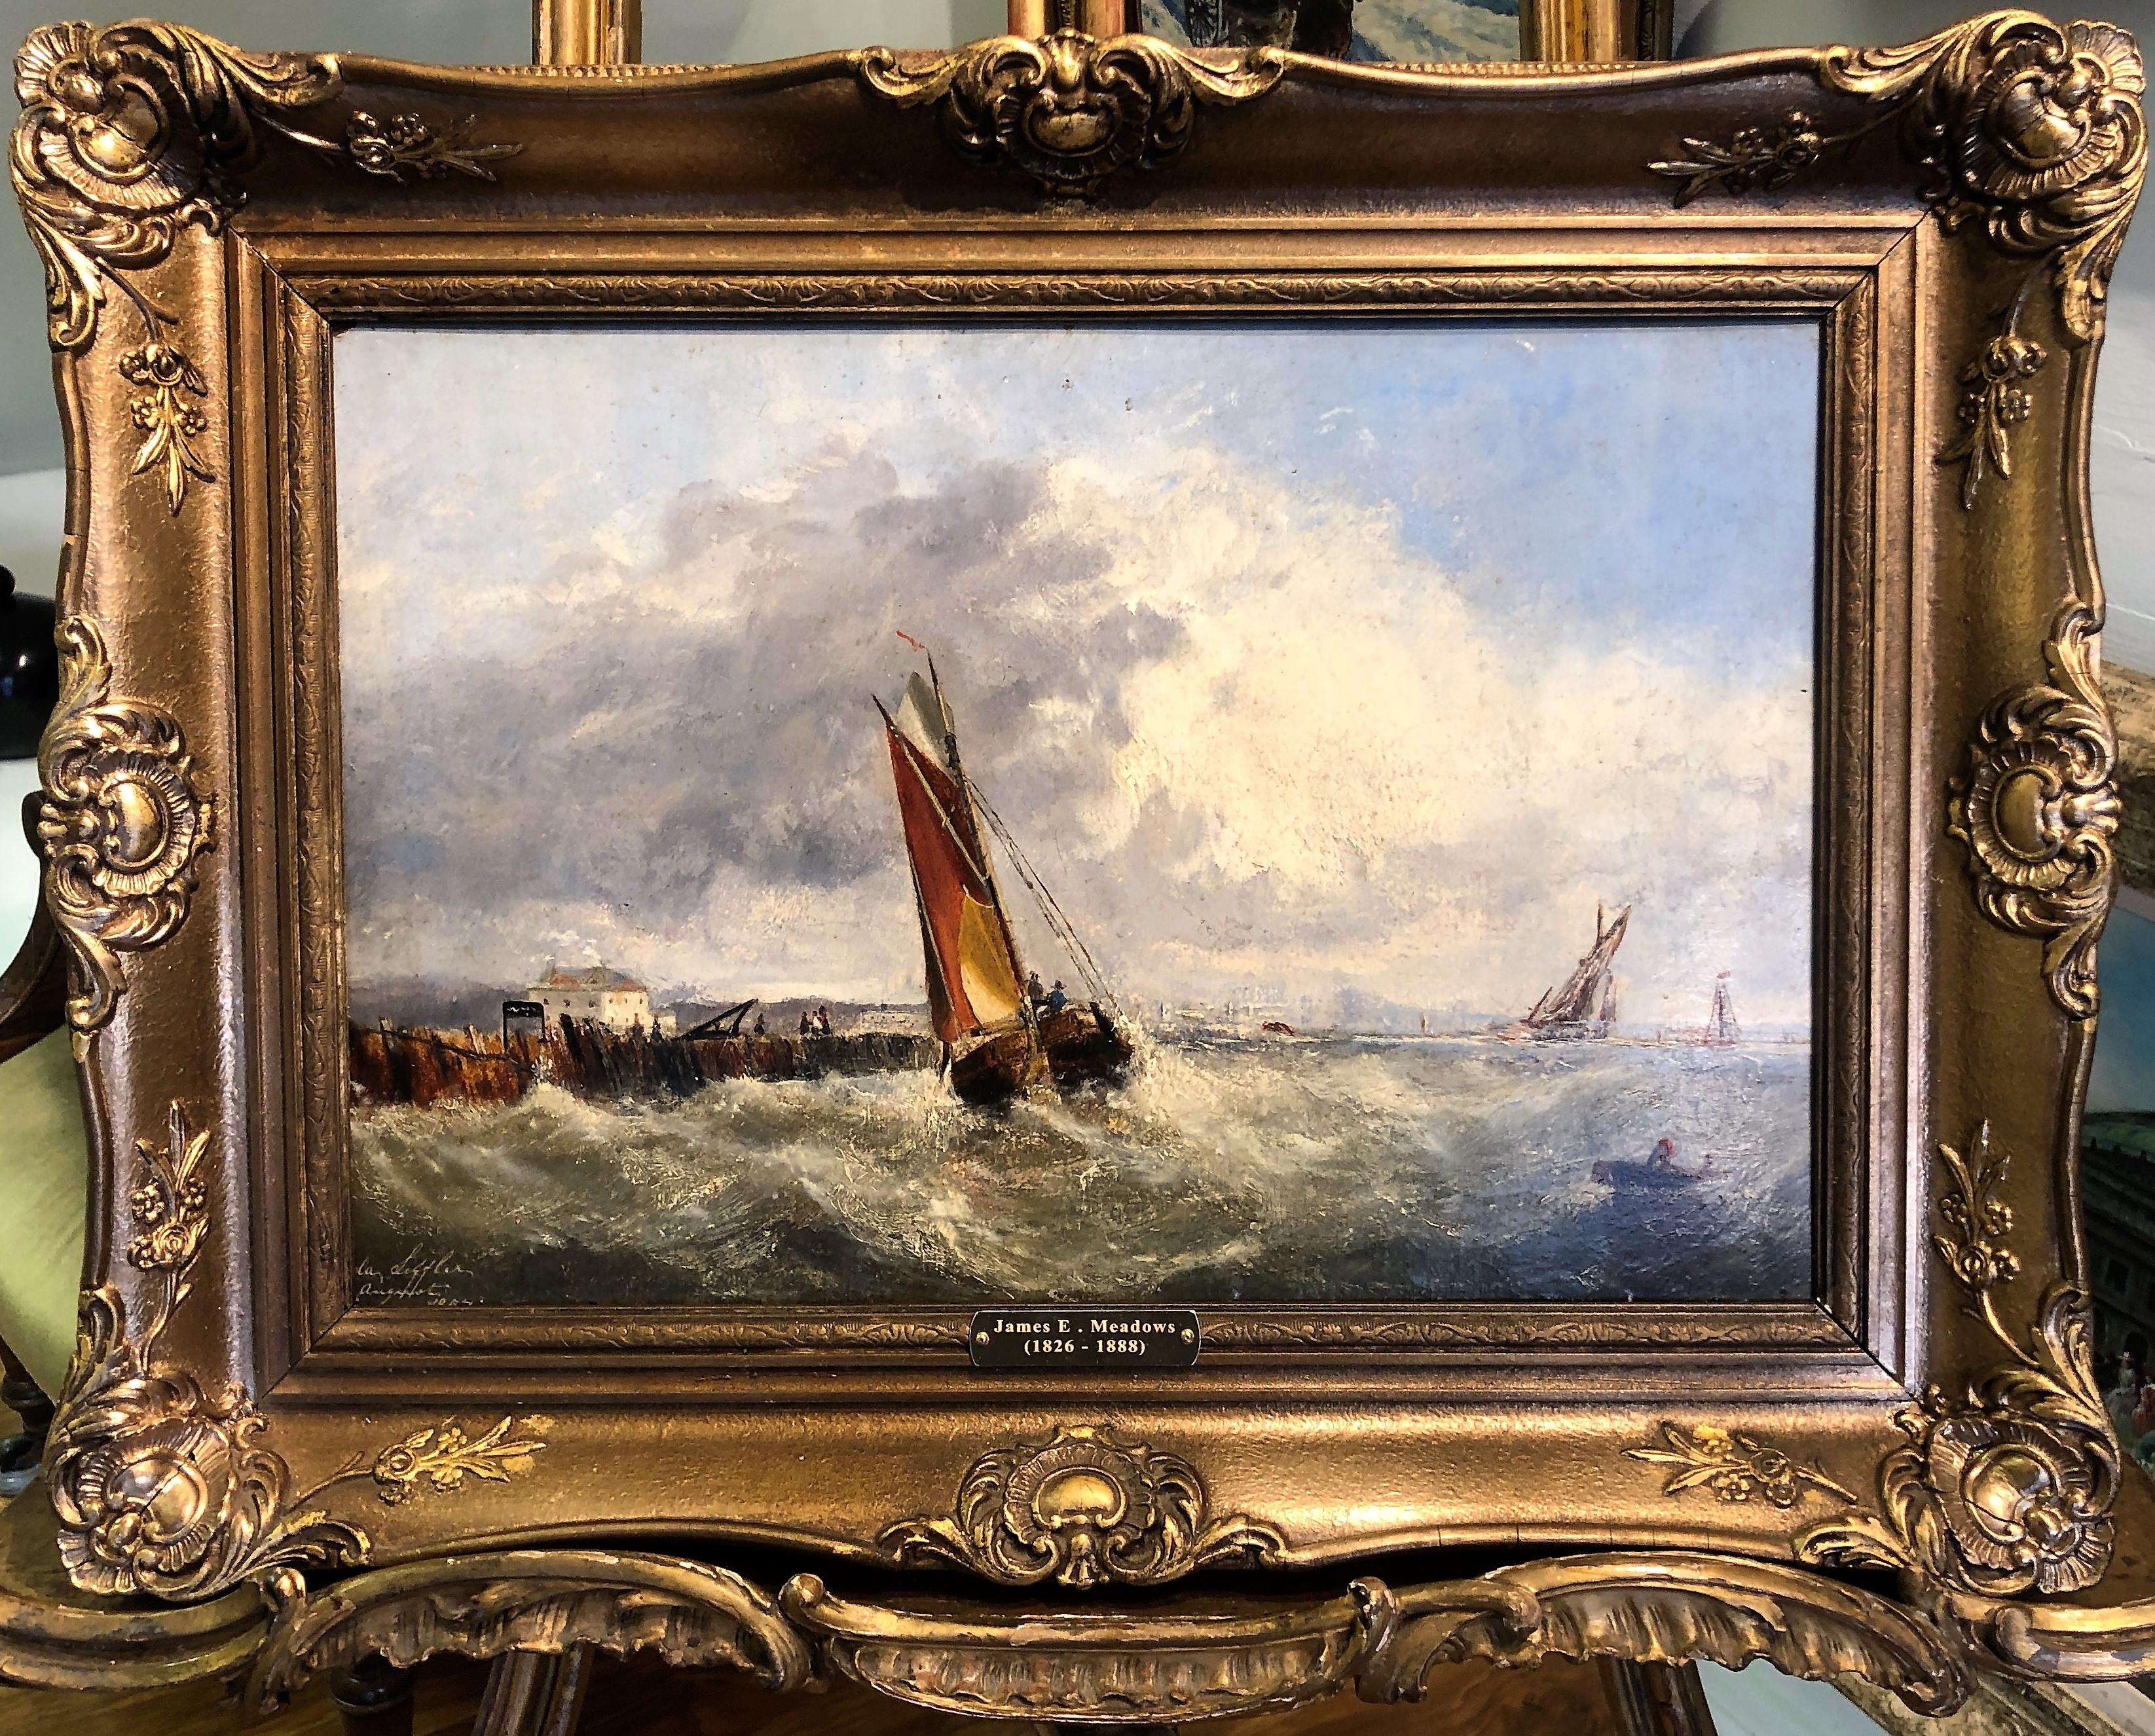 James Edward Meadows Landscape Painting - OLD MASTER OIL PAINTING High Quality 19th CENTURY Stormy Seas Gold Gilt Frame